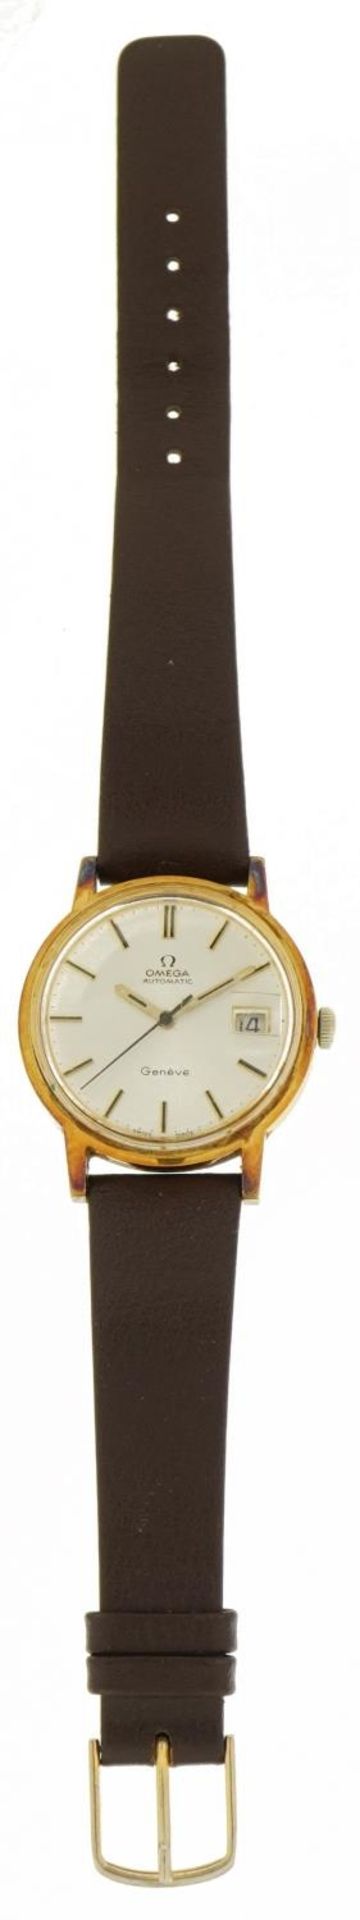 Omega, gentlemen's Omega Geneve automatic wristwatch with date aperture and Omega box, the case 35mm - Image 3 of 6